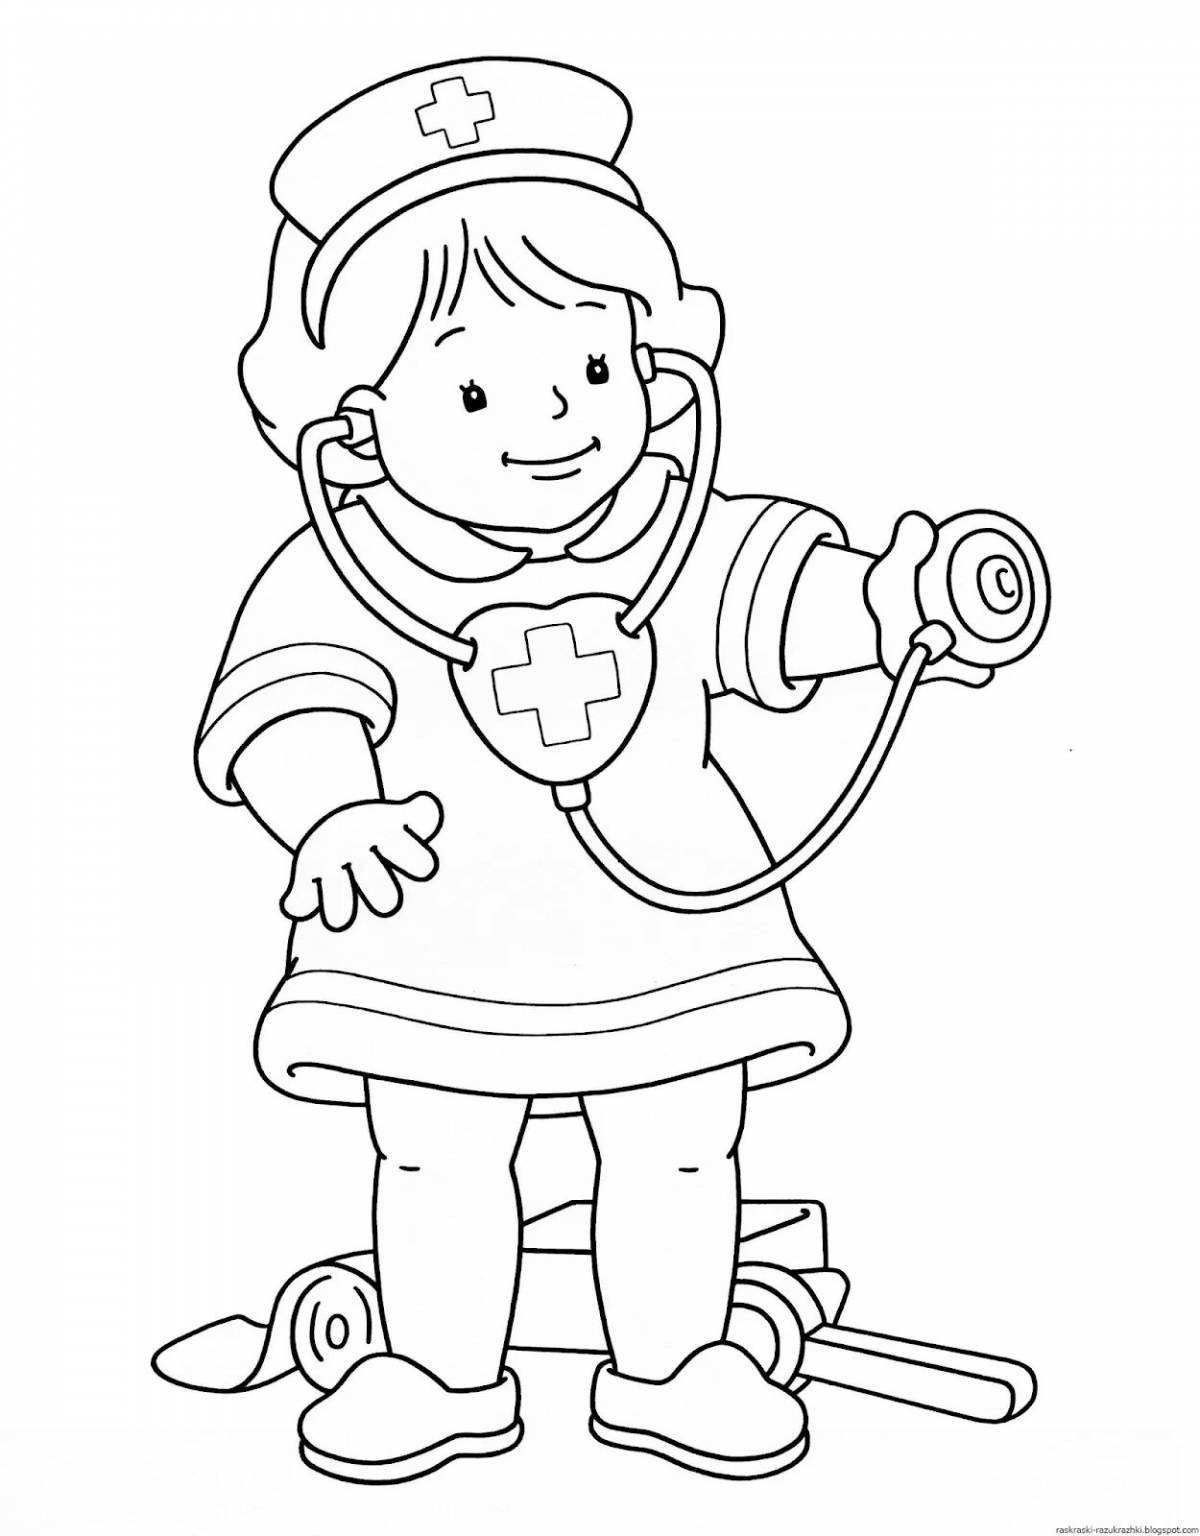 Fun coloring pages of professions in kindergarten